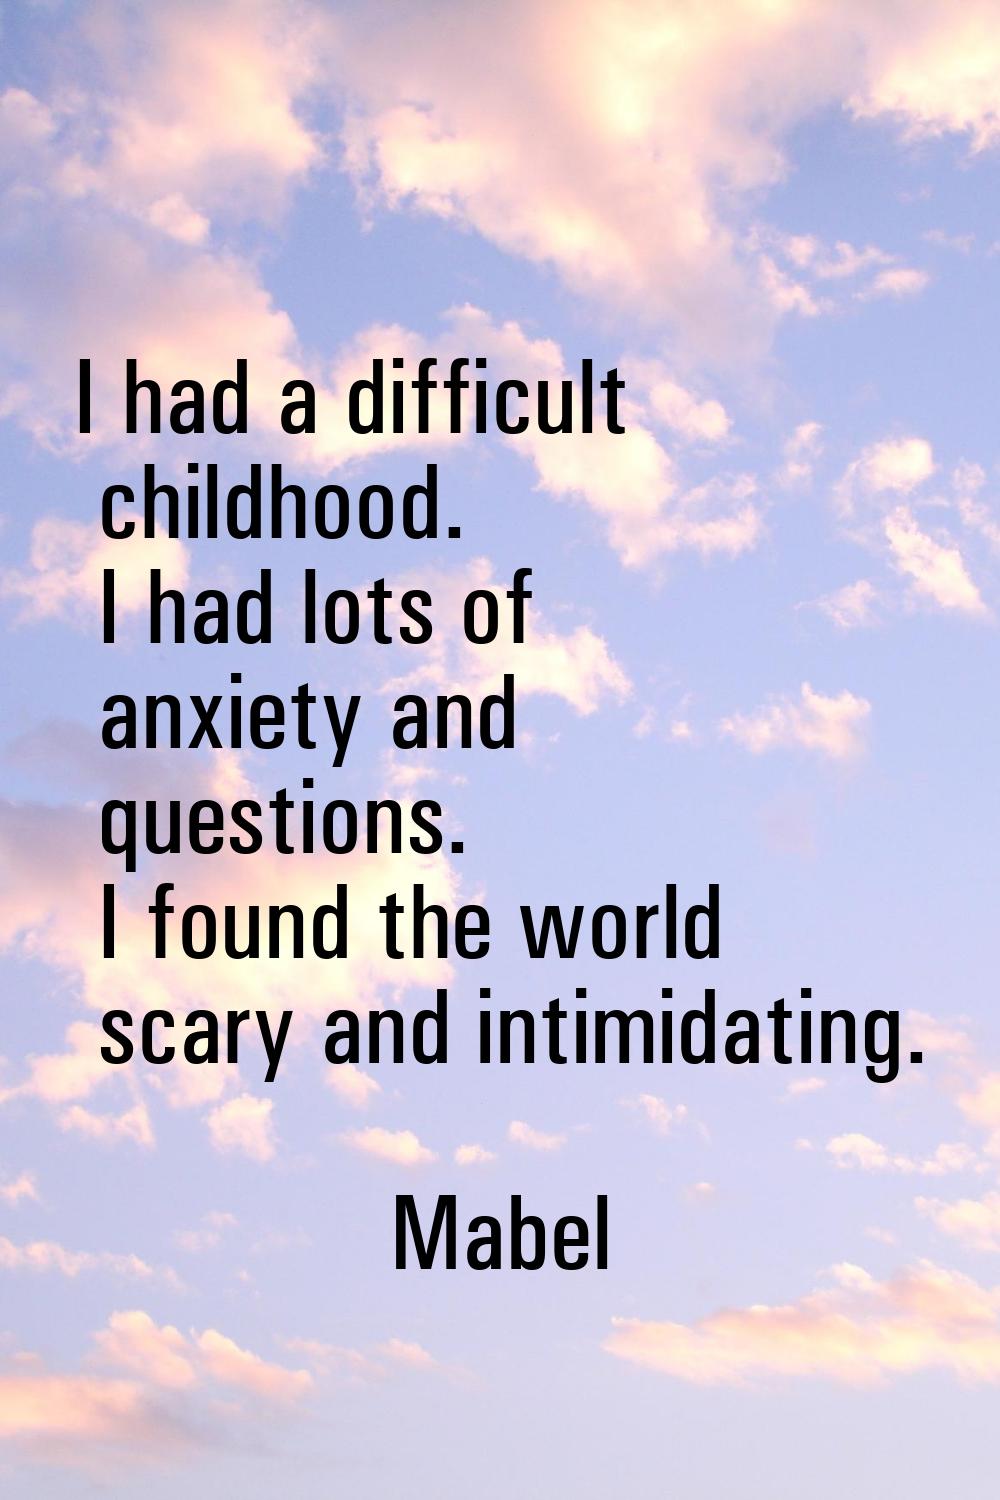 I had a difficult childhood. I had lots of anxiety and questions. I found the world scary and intim